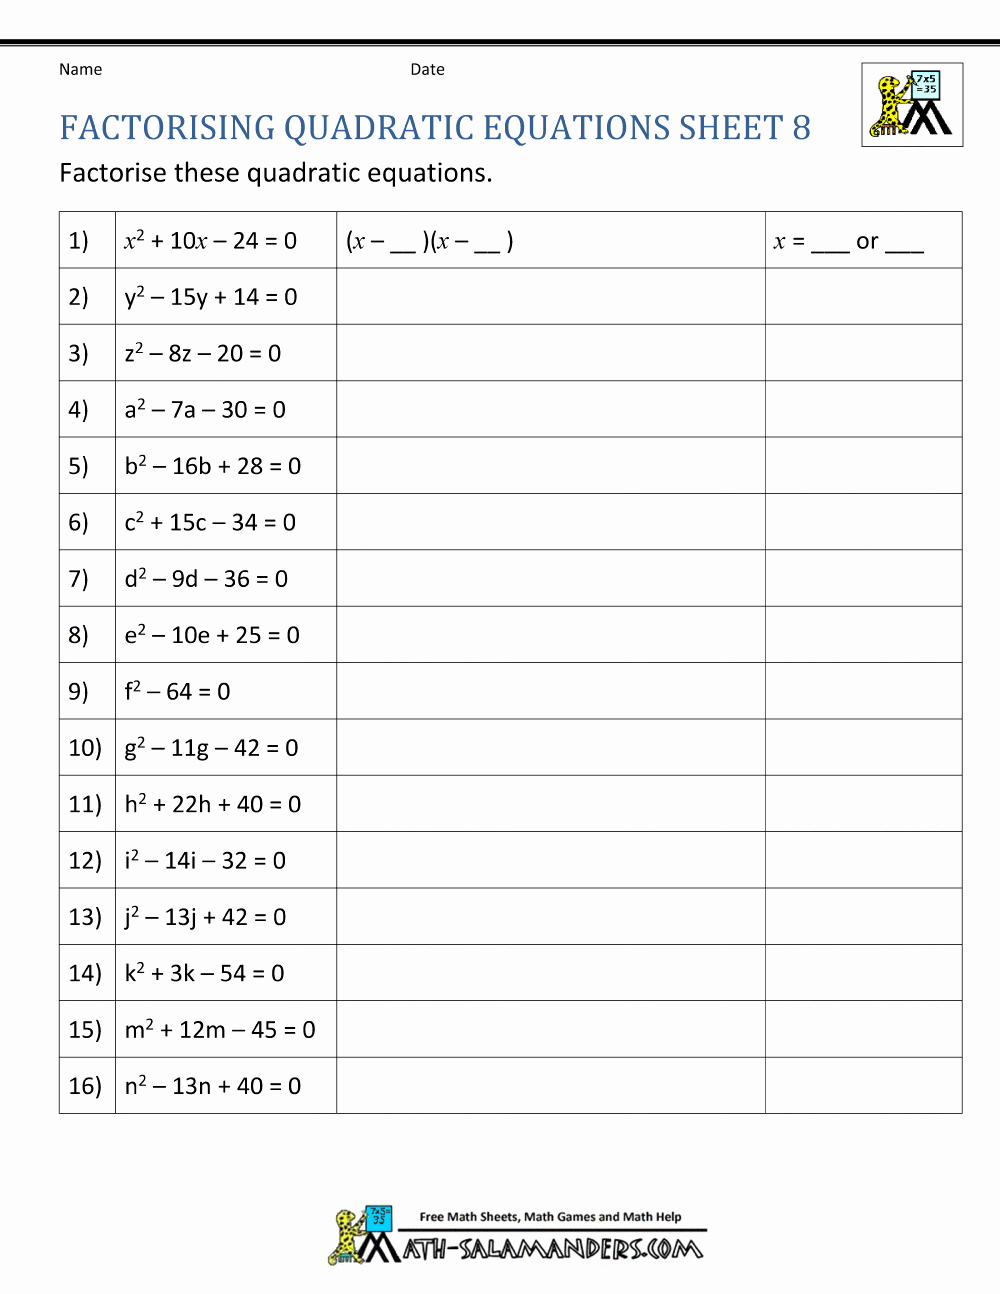 Quadratic Functions Worksheet with Answers Luxury Factoring Quadratic Equations